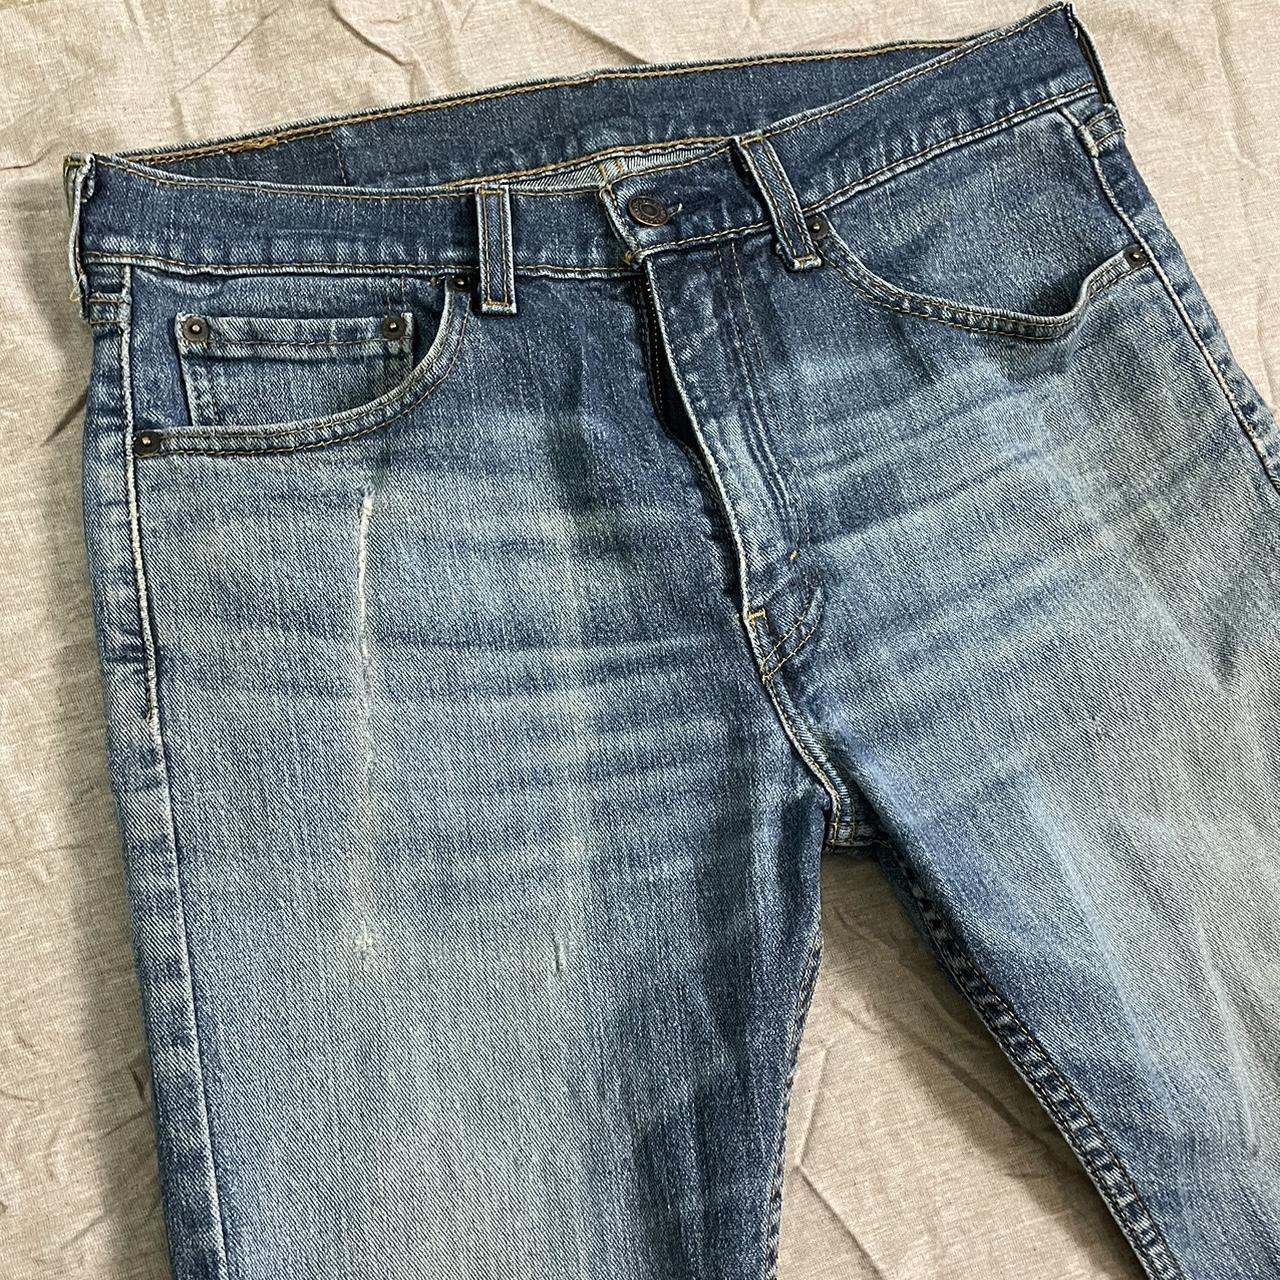 Distressed Levi’s 505 Great wash/condition Size... - Depop